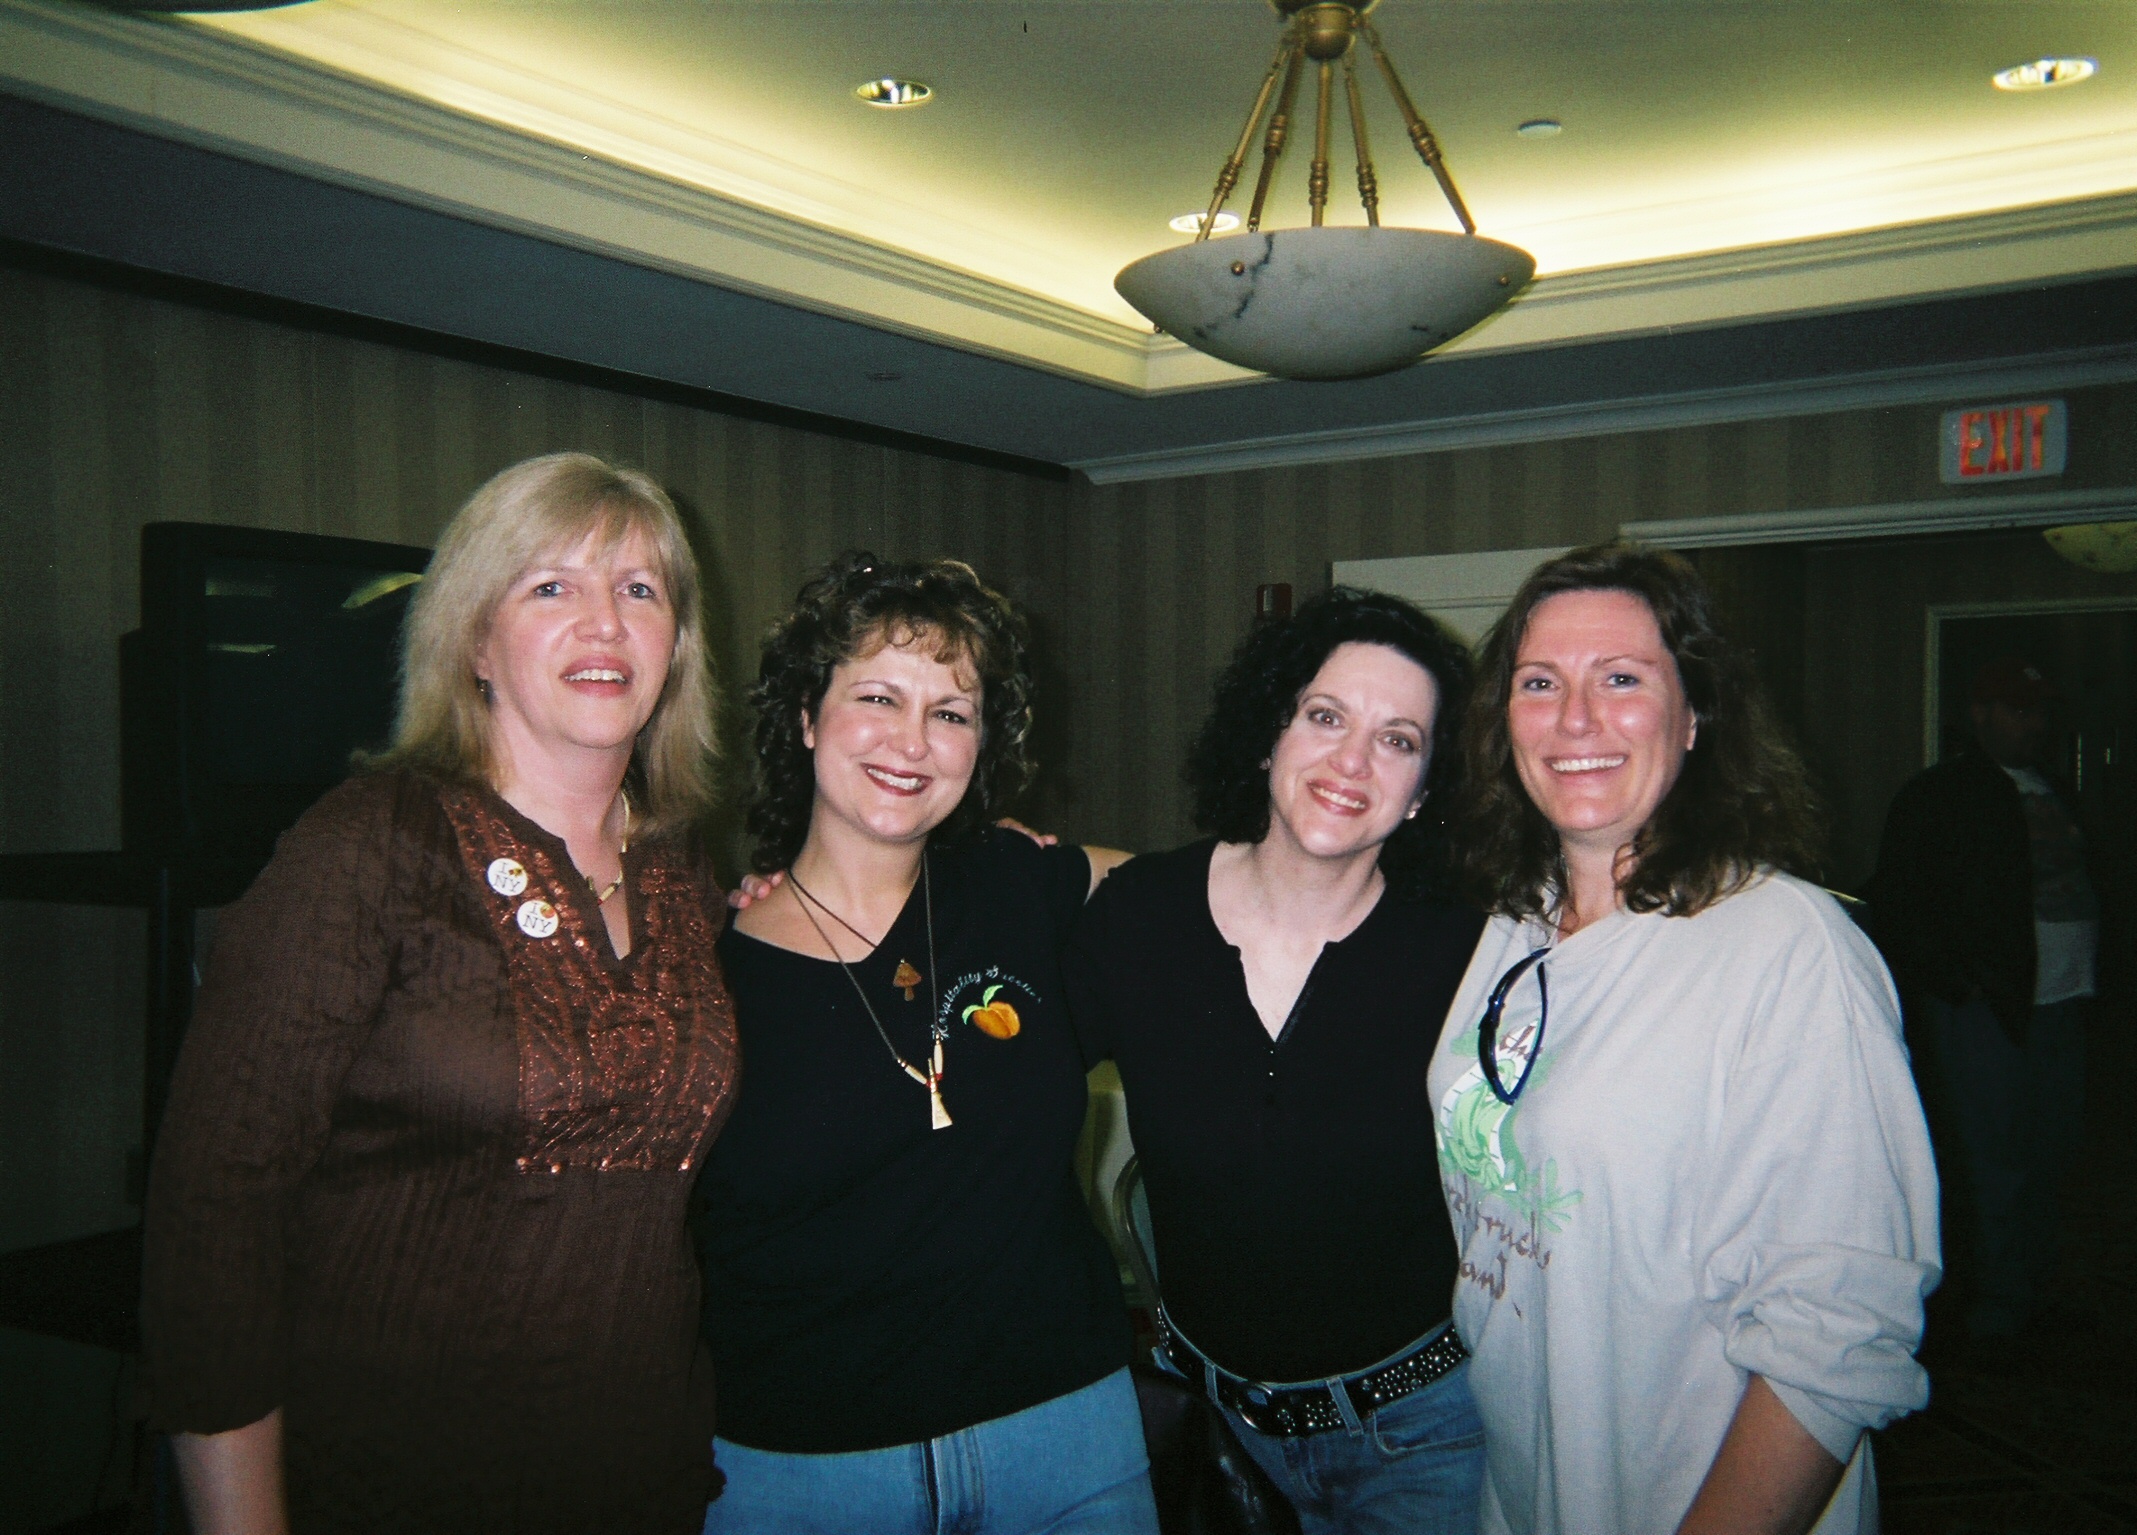 Barb, Jacquie, Nicole and Janet at the HTN party 3-11-06